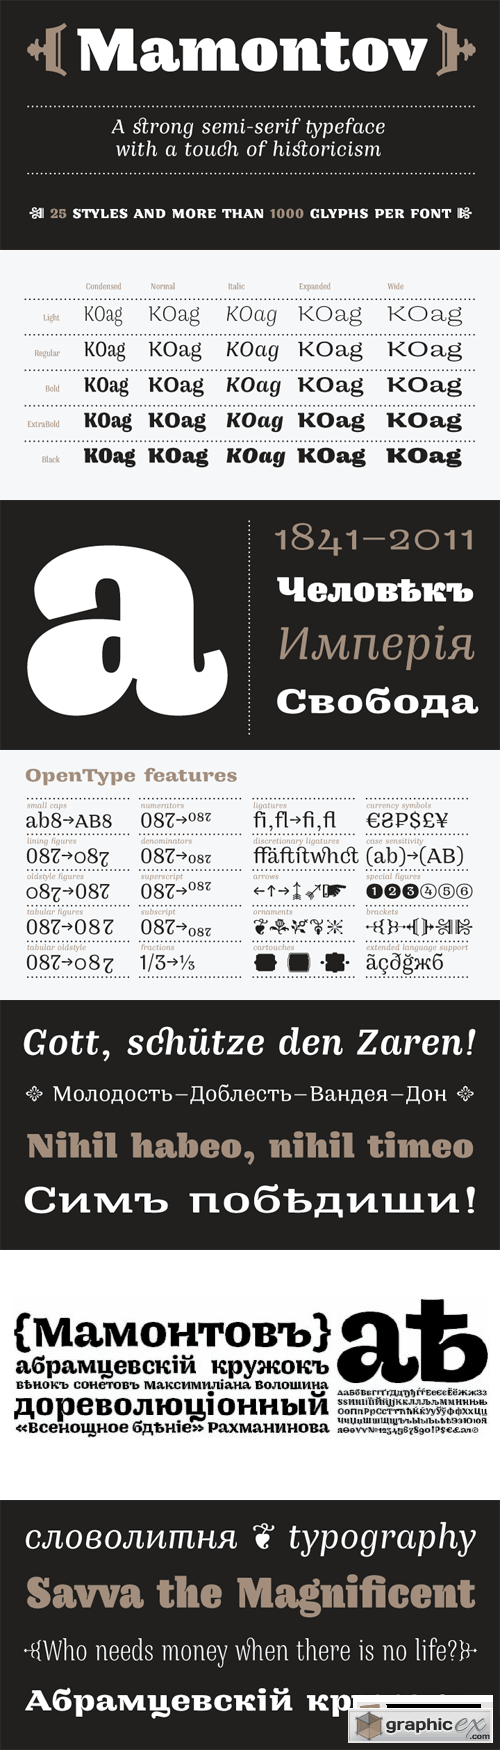 Mamontov Font Family - 25 Fonts for $800